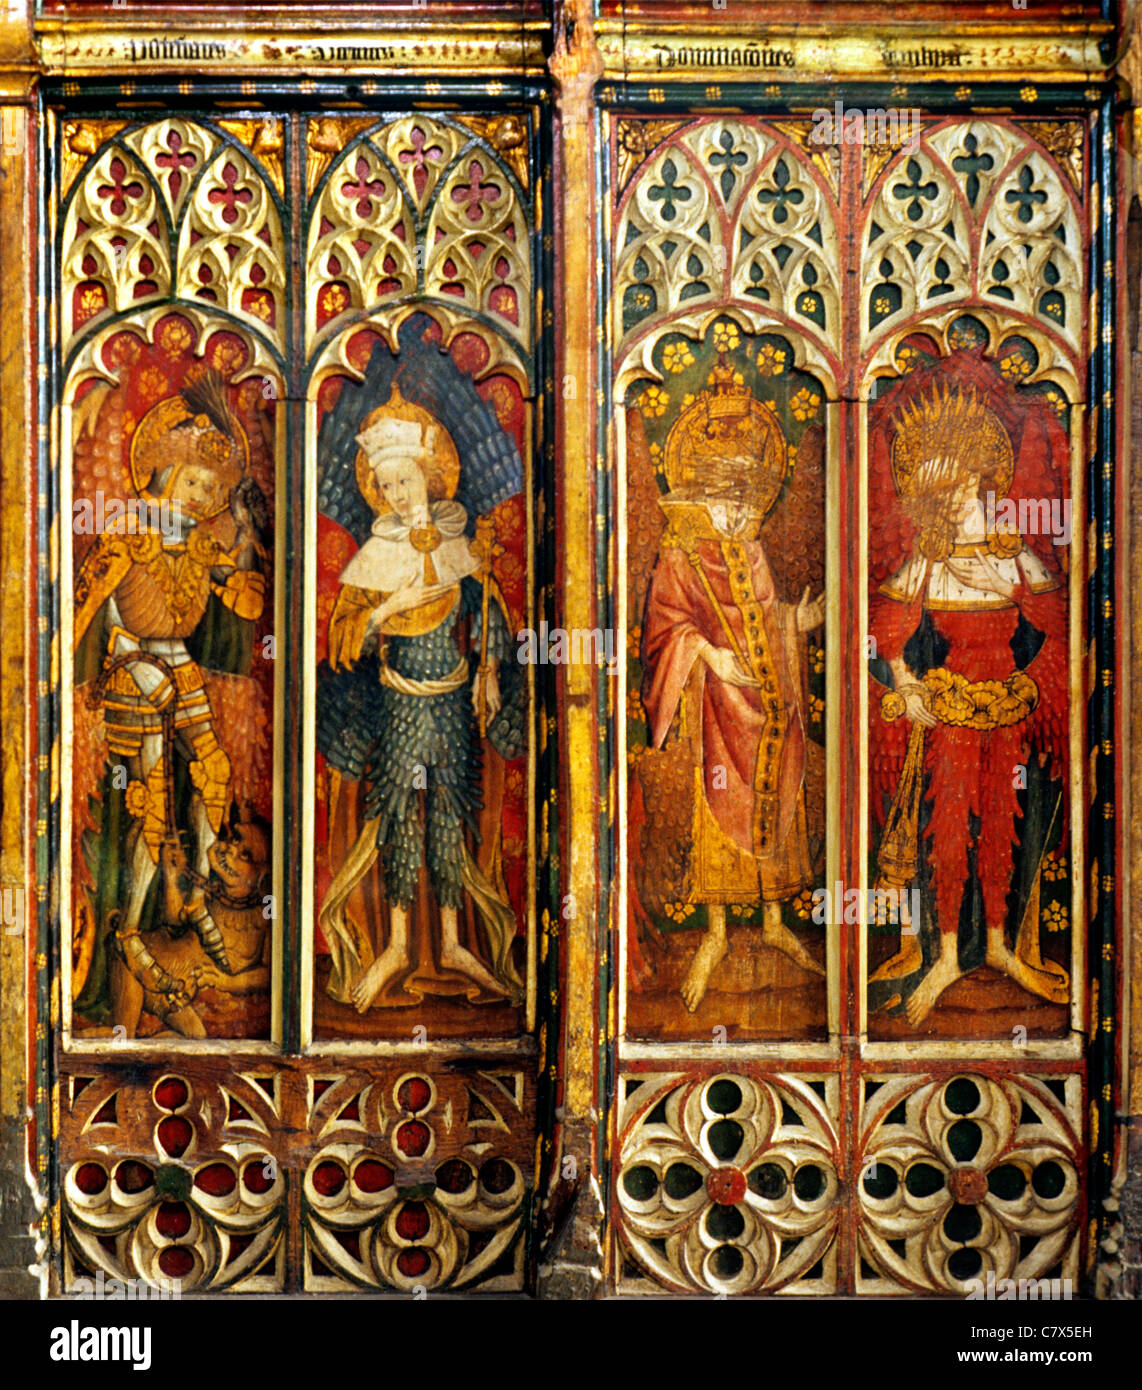 Barton Turf, Norfolk, rood screen, north screen, 4 panels, Powers, Virtues, Dominations, Seraphim, four of the Nine Orders Stock Photo